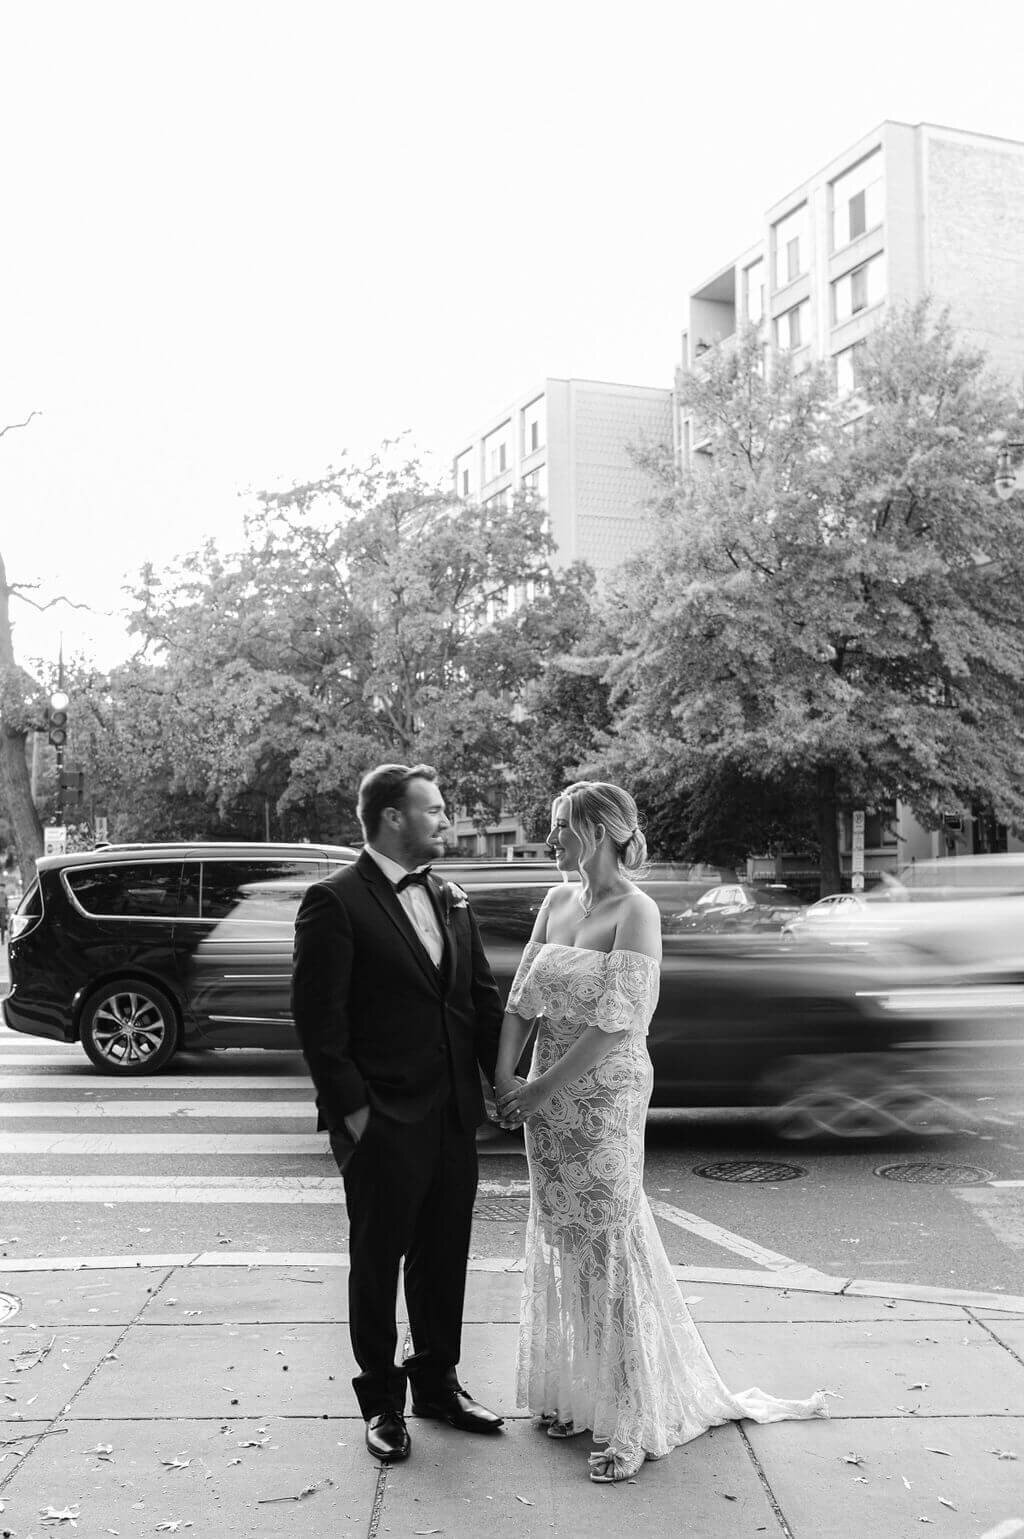 Motion blur image of a bride and groom holding hands as cars drive by them during their wedding photos in DC